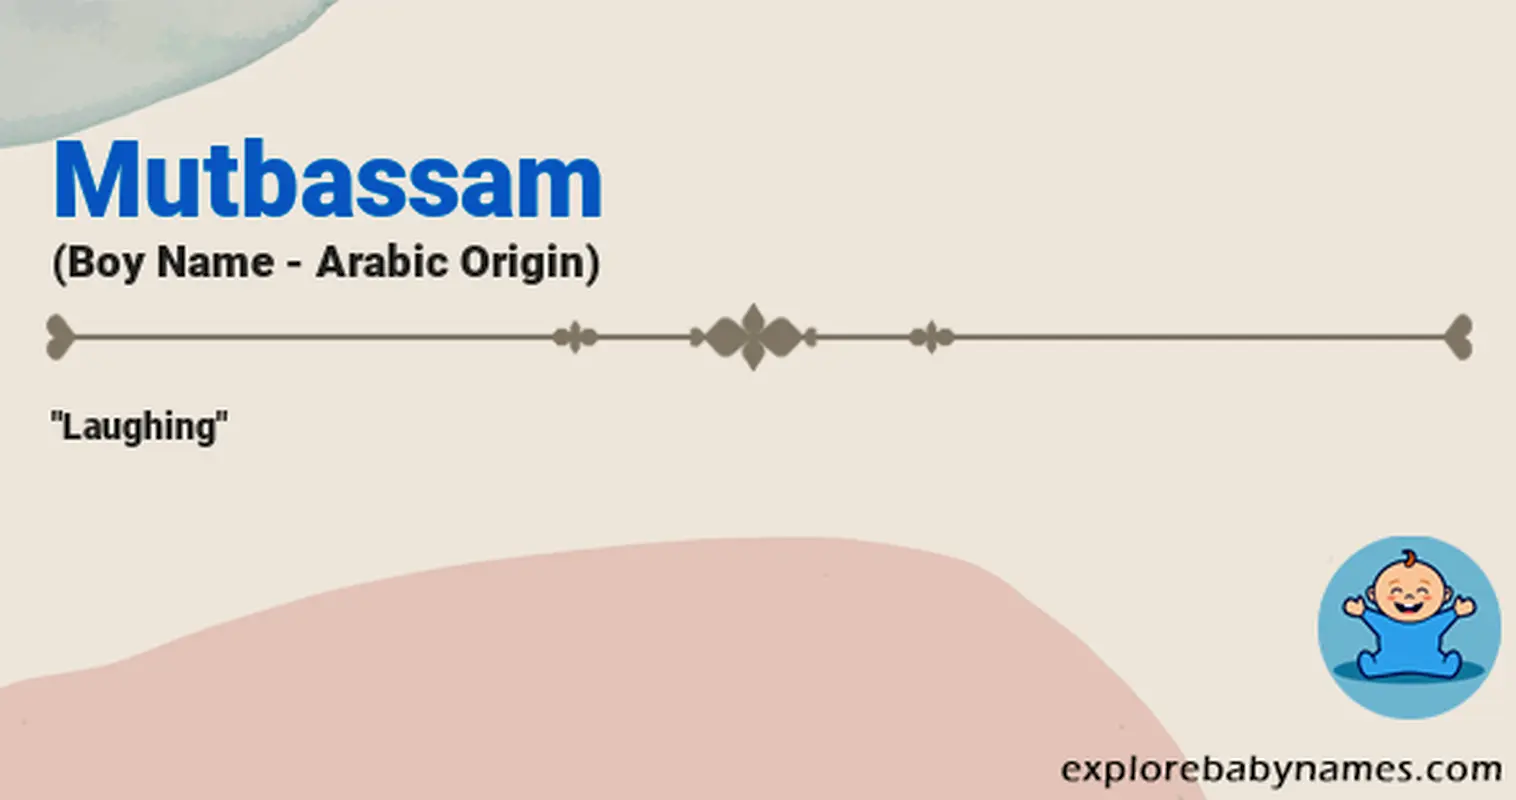 Meaning of Mutbassam